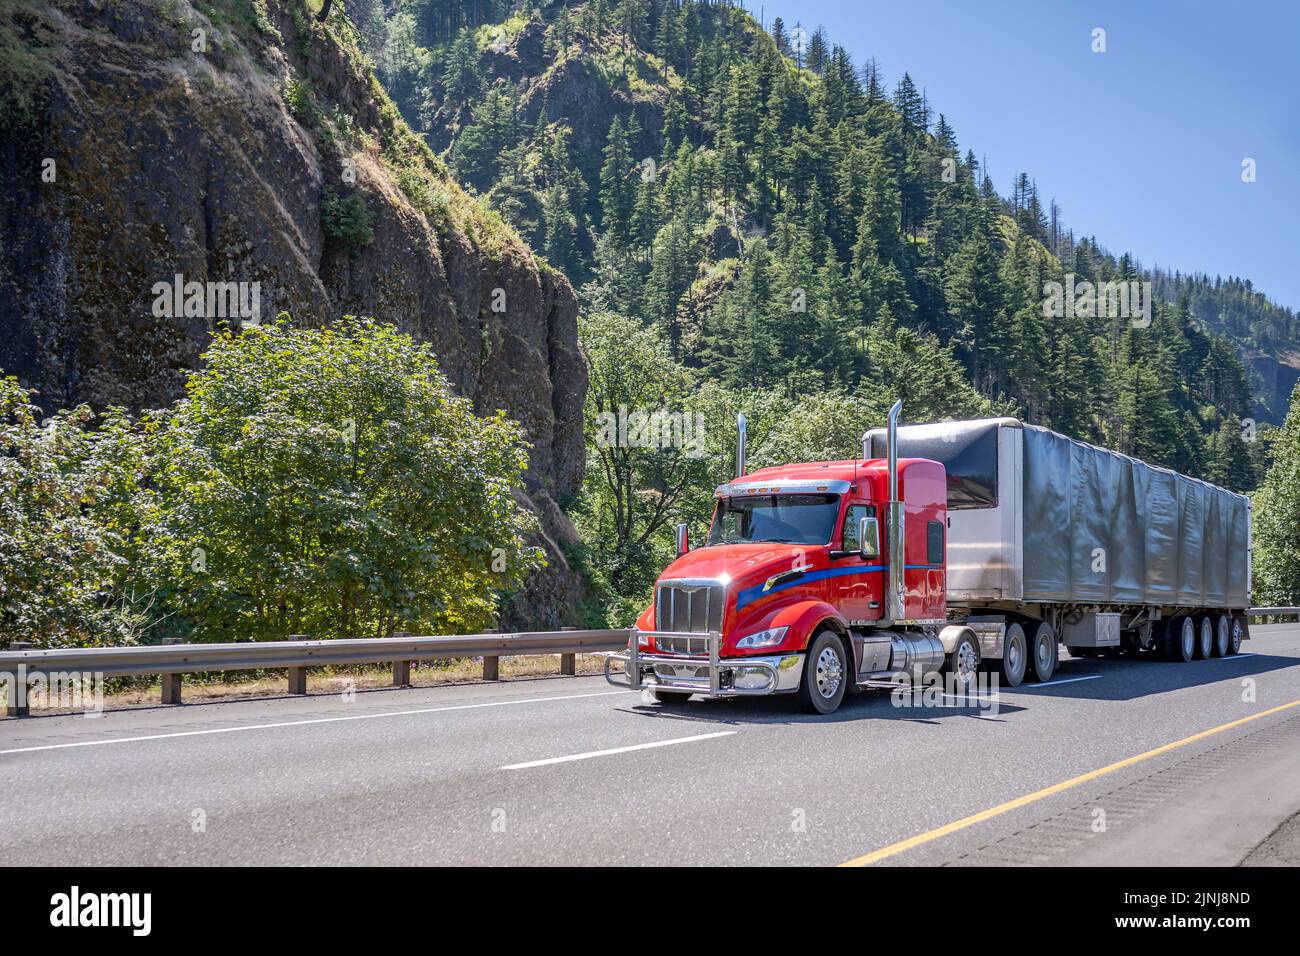 Red industrial low cab profile big rig semi truck transporting commercial cargo in covered framed dry van semi trailer moving on the wide highway road Stock Photo